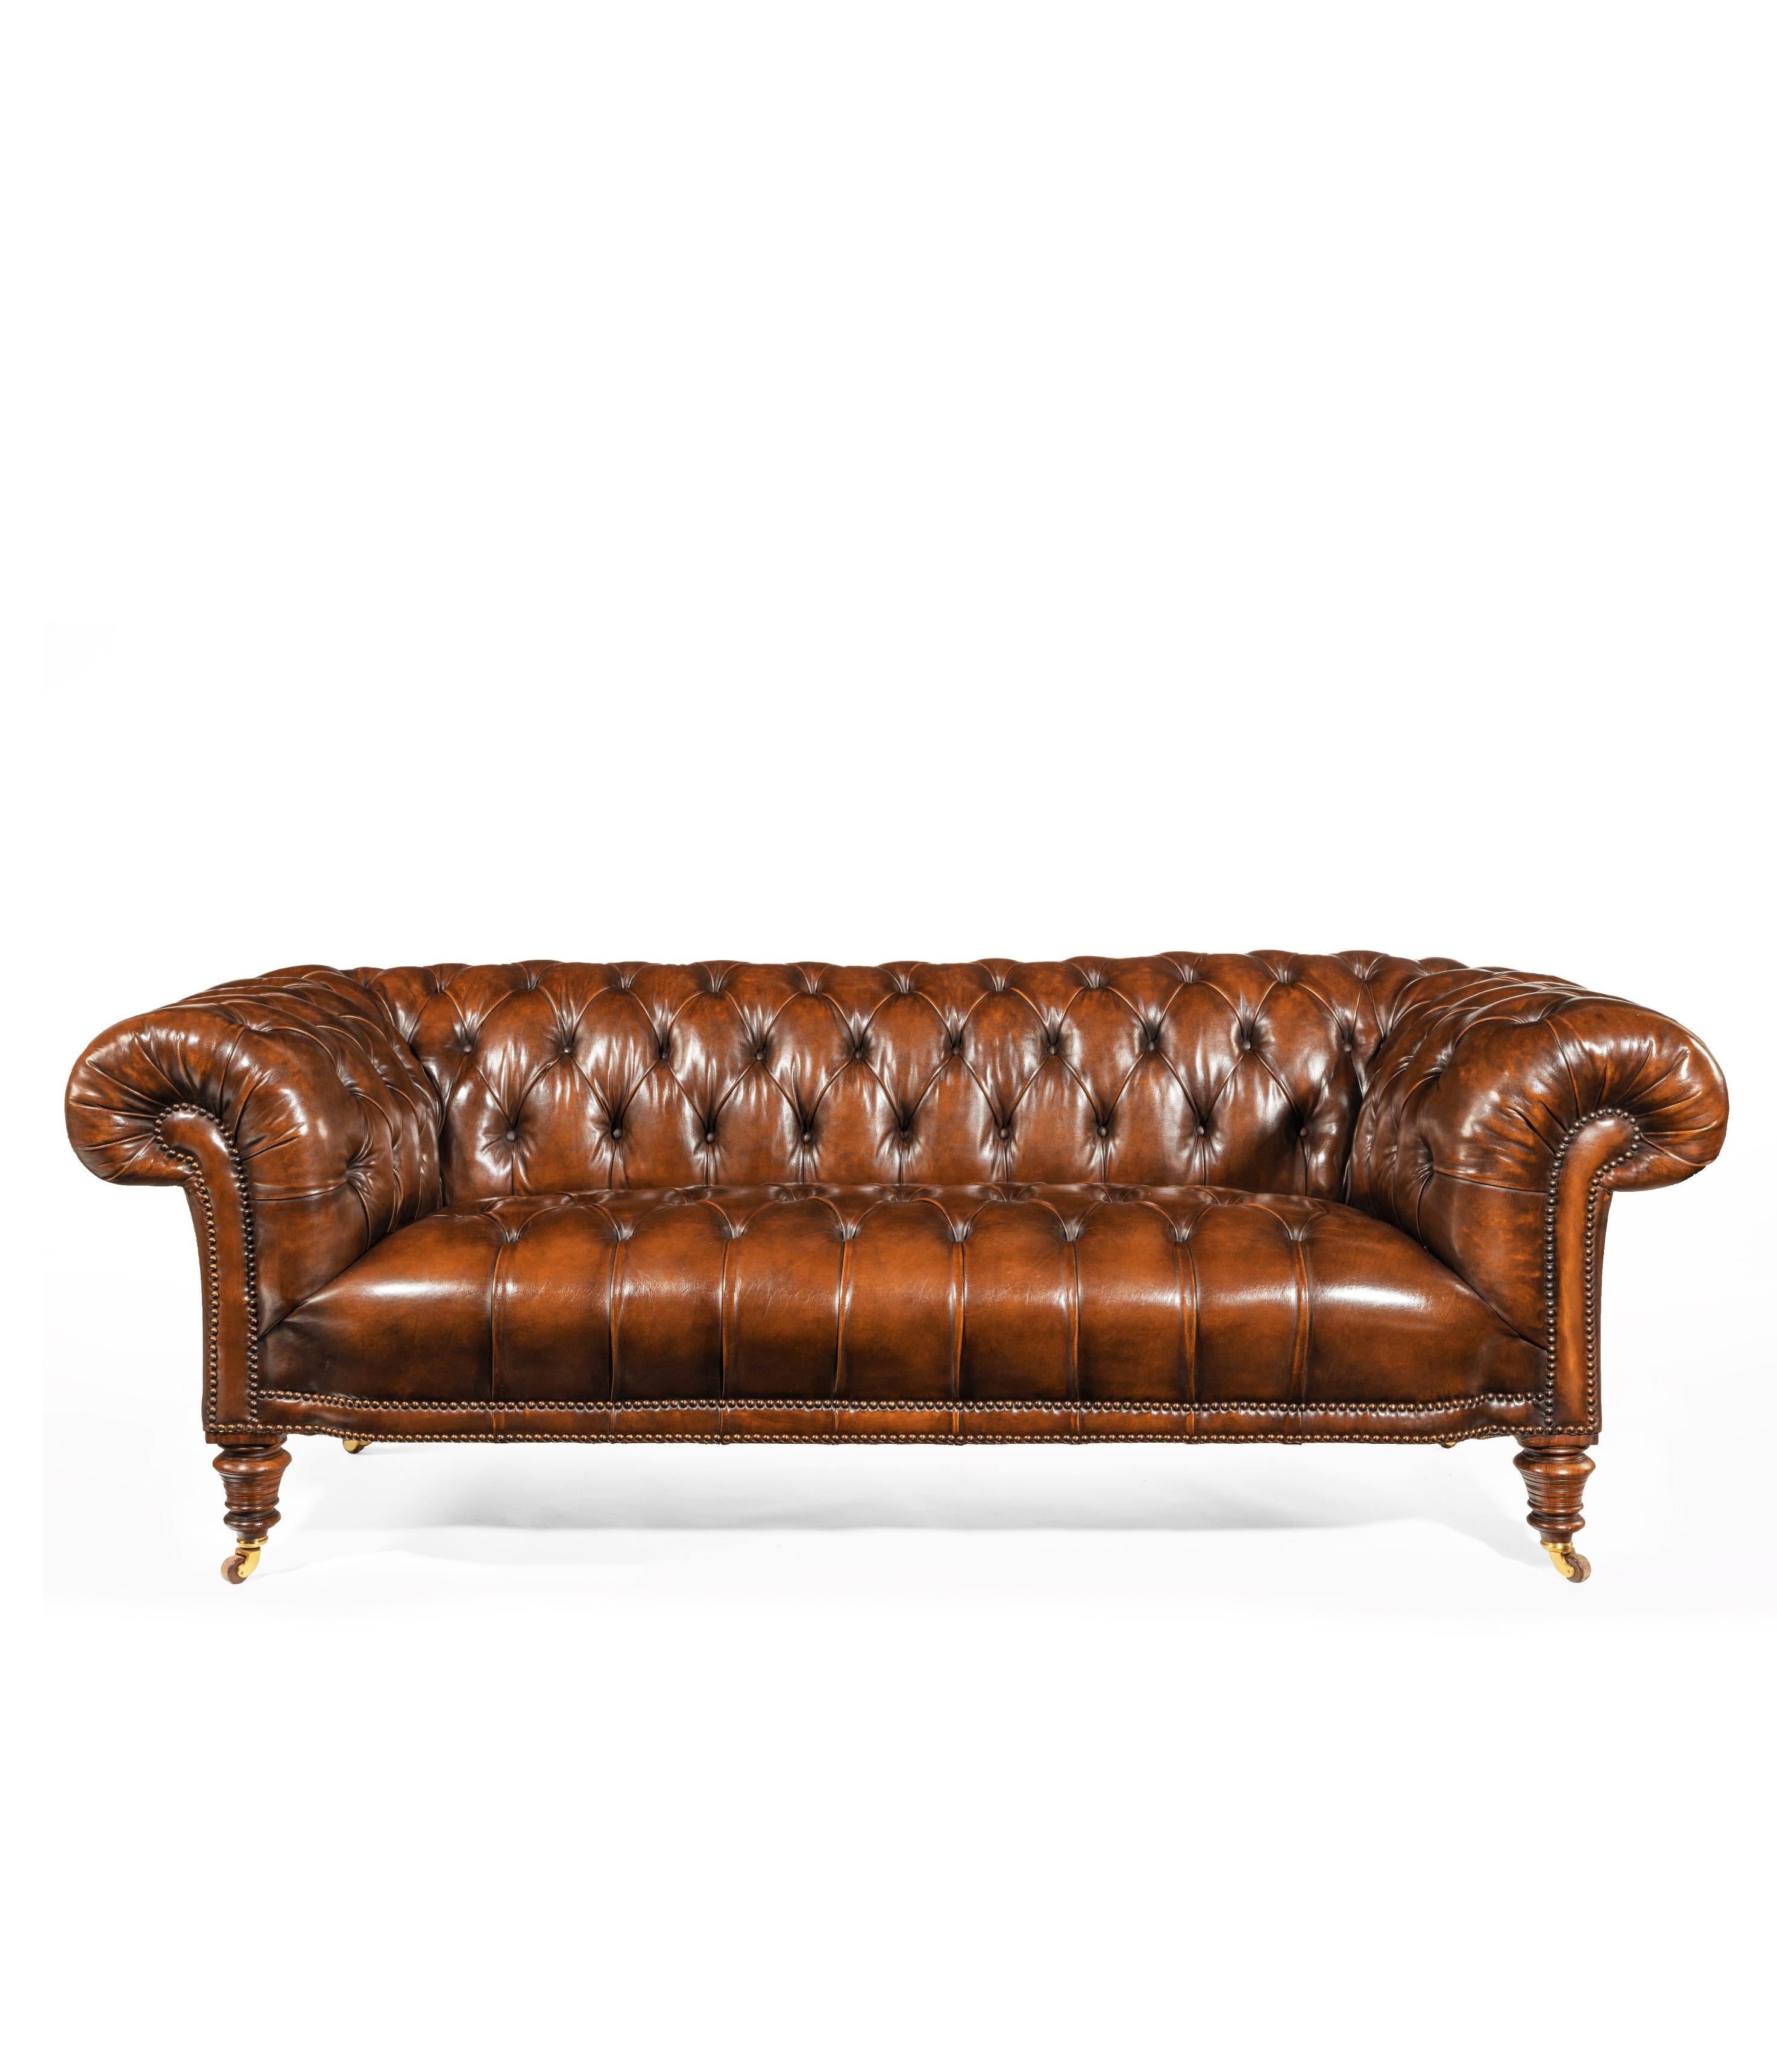 An extremely well drawn 19th century figured walnut deep buttoned leather upholstered Chesterfield by Gillows, the back legs stamped 5359 which is a four figured Gillows numbering stamp.

Having beautifully pronounced shaped scrolling arms and